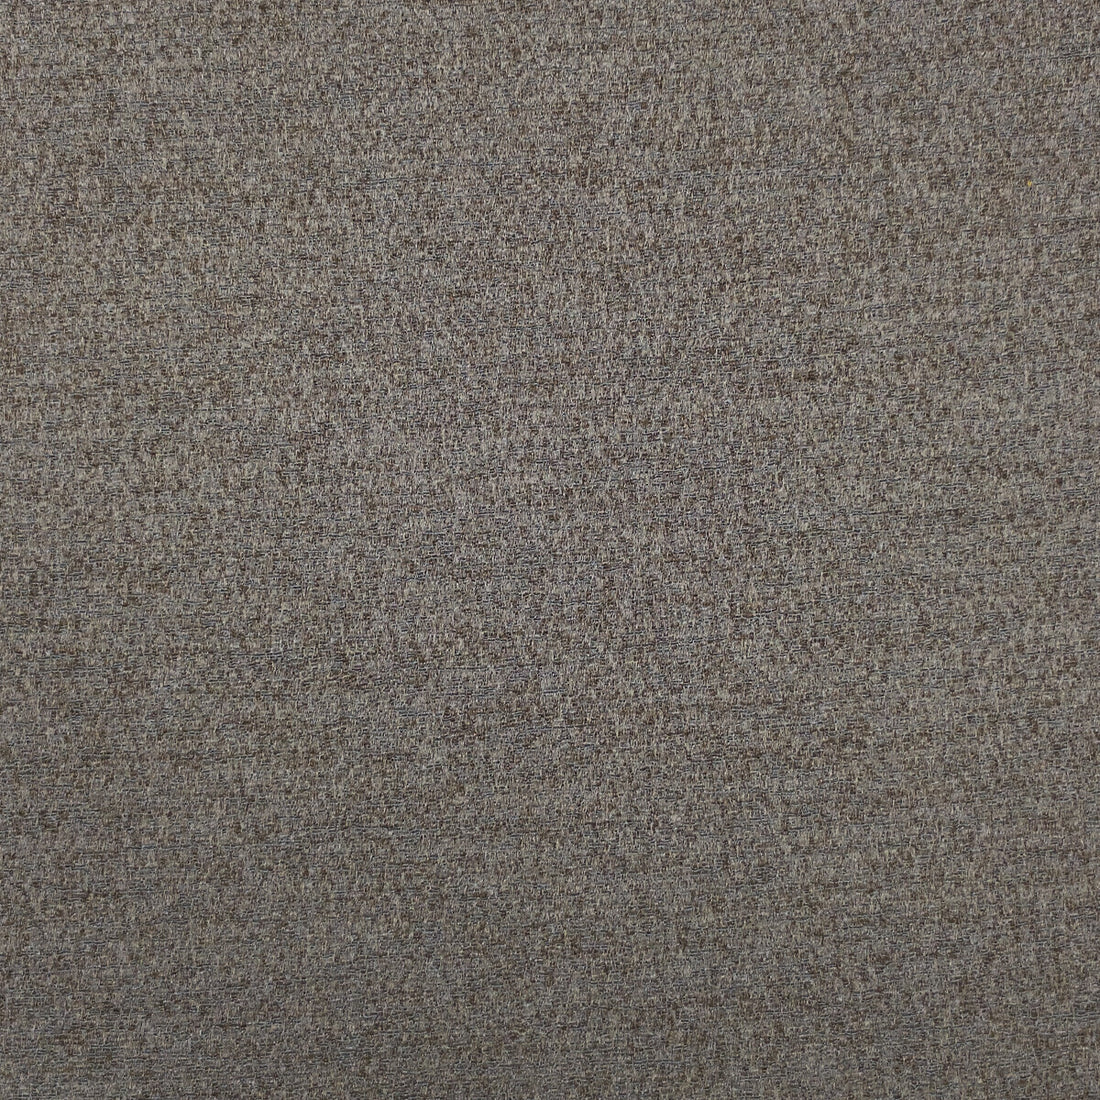 Fume fabric in 3 color - pattern LZ-30202.03.0 - by Kravet Design in the Lizzo collection